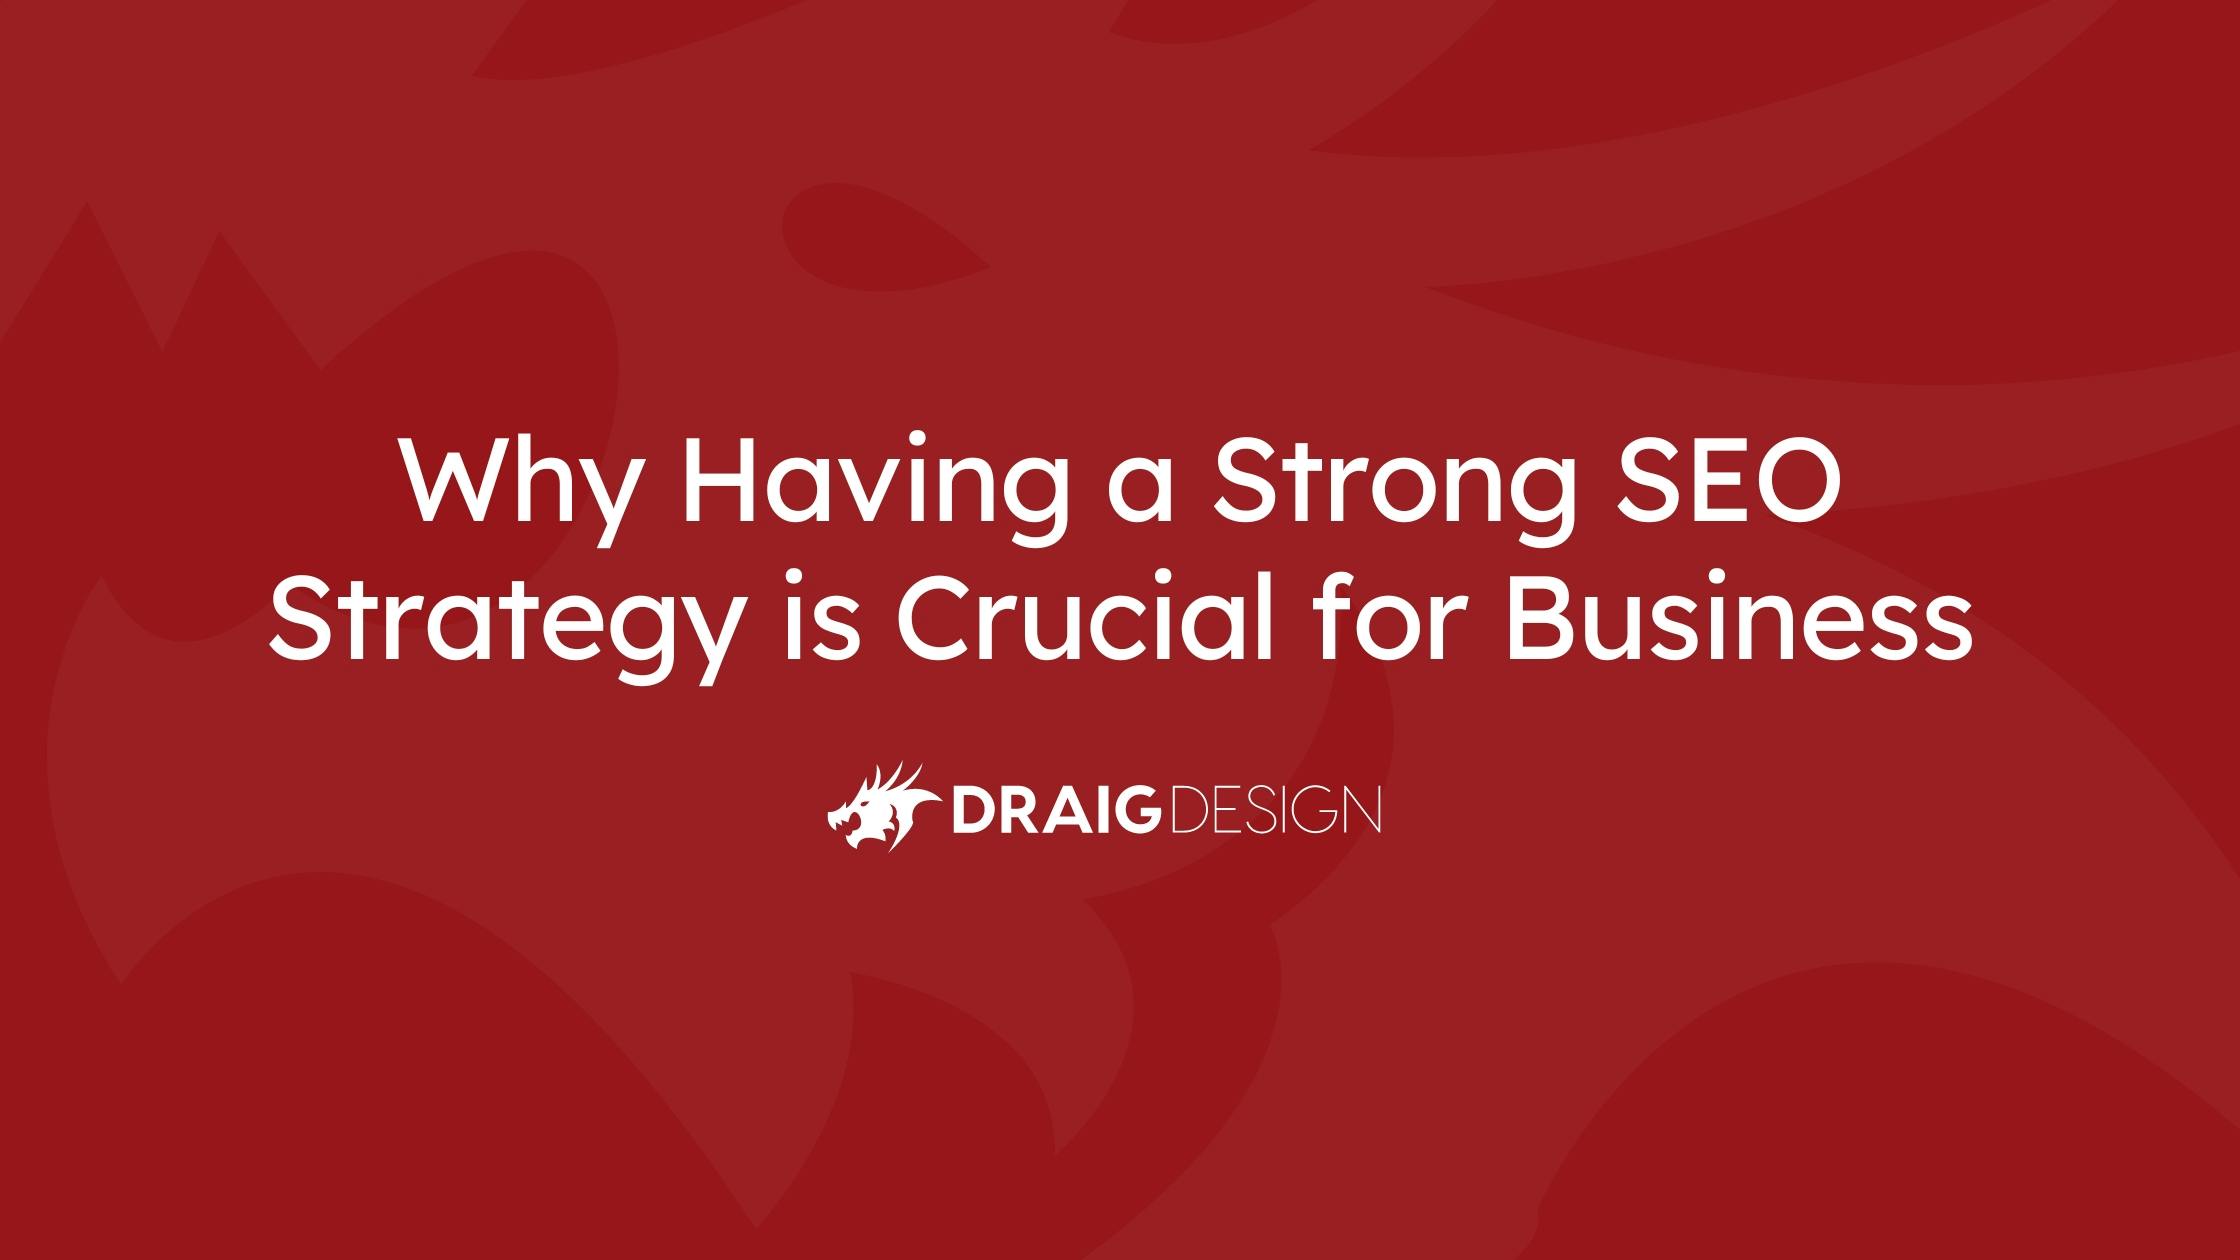 Why Having a Strong SEO Strategy is Crucial for Business